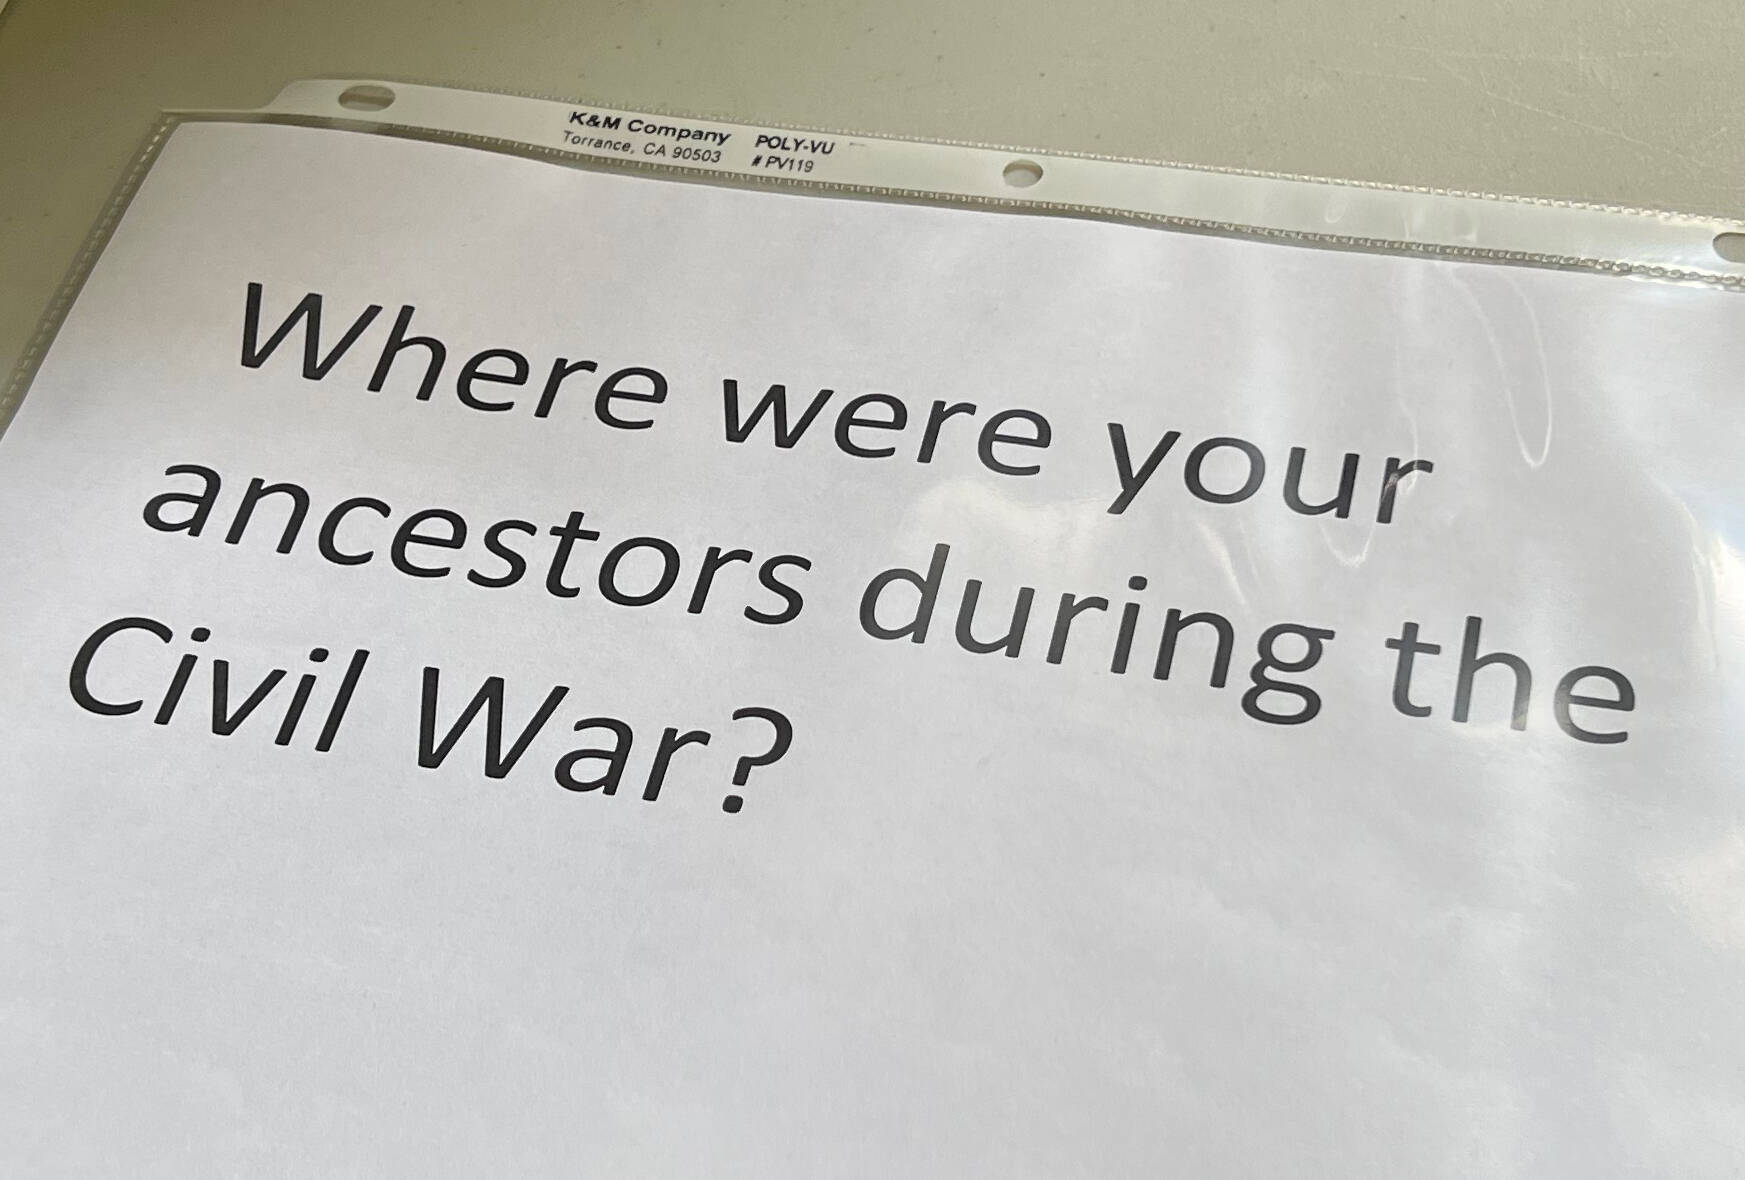 One of the many questions posed to visitors as they walked through the Black history exhibit curated by Karen Akuyae Vargas for the Juneteenth celebration.